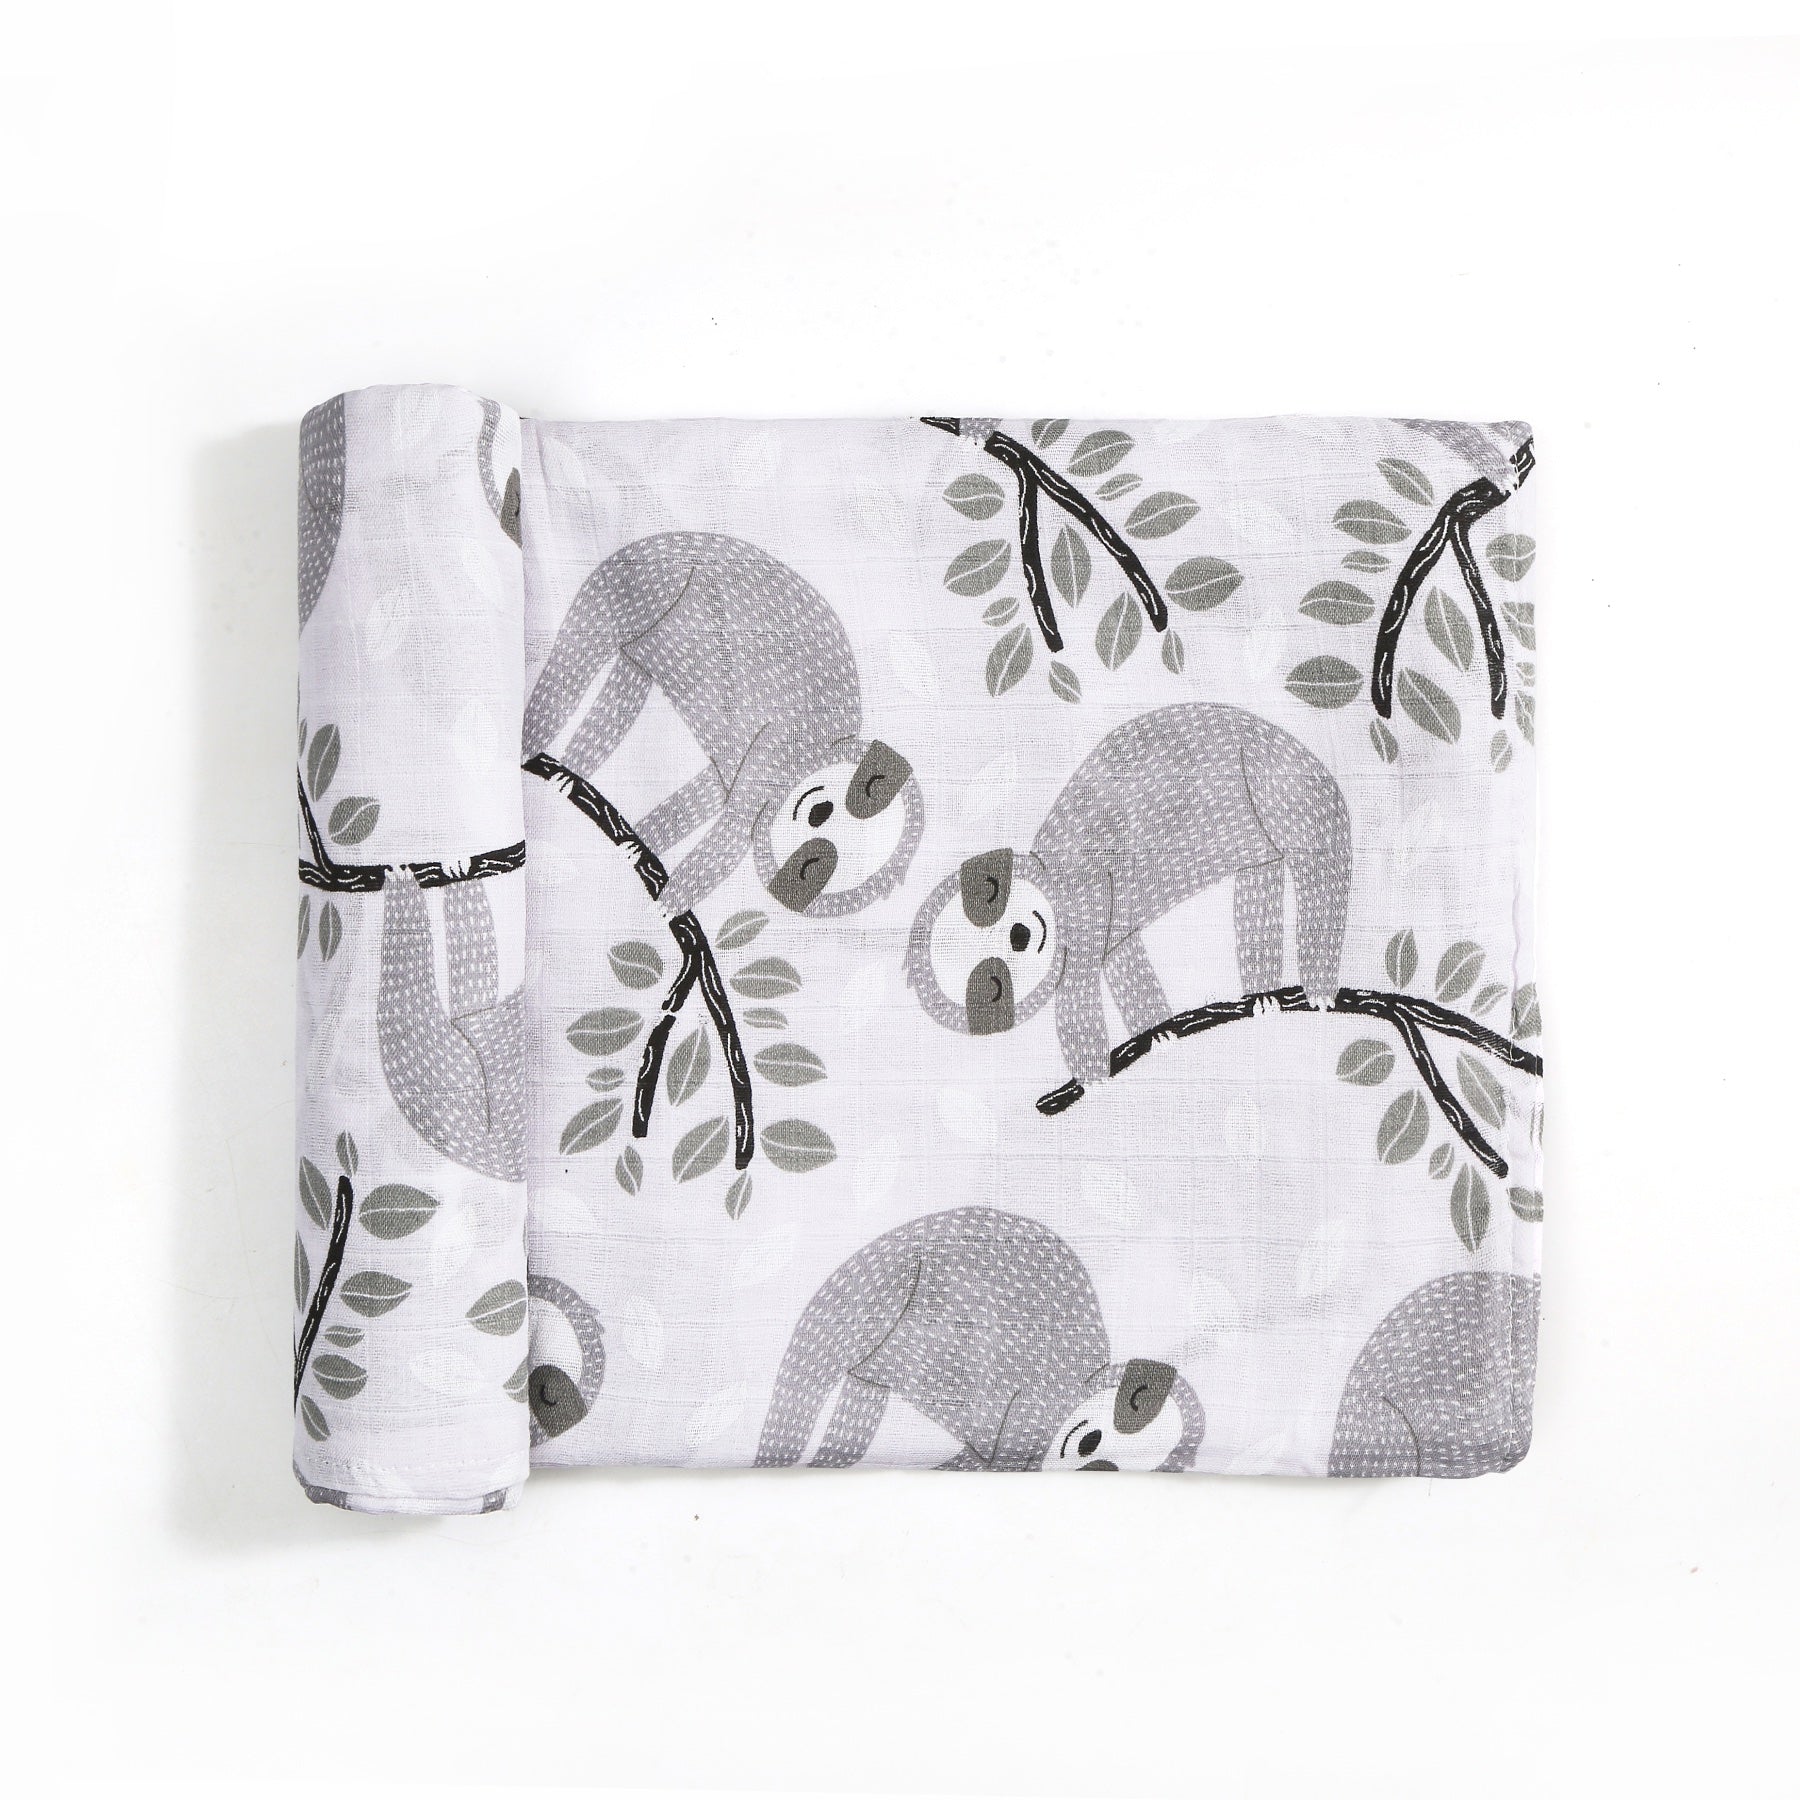 Sleepy Sloth Swaddle - Baby Swaddles at Louie Meets Lola